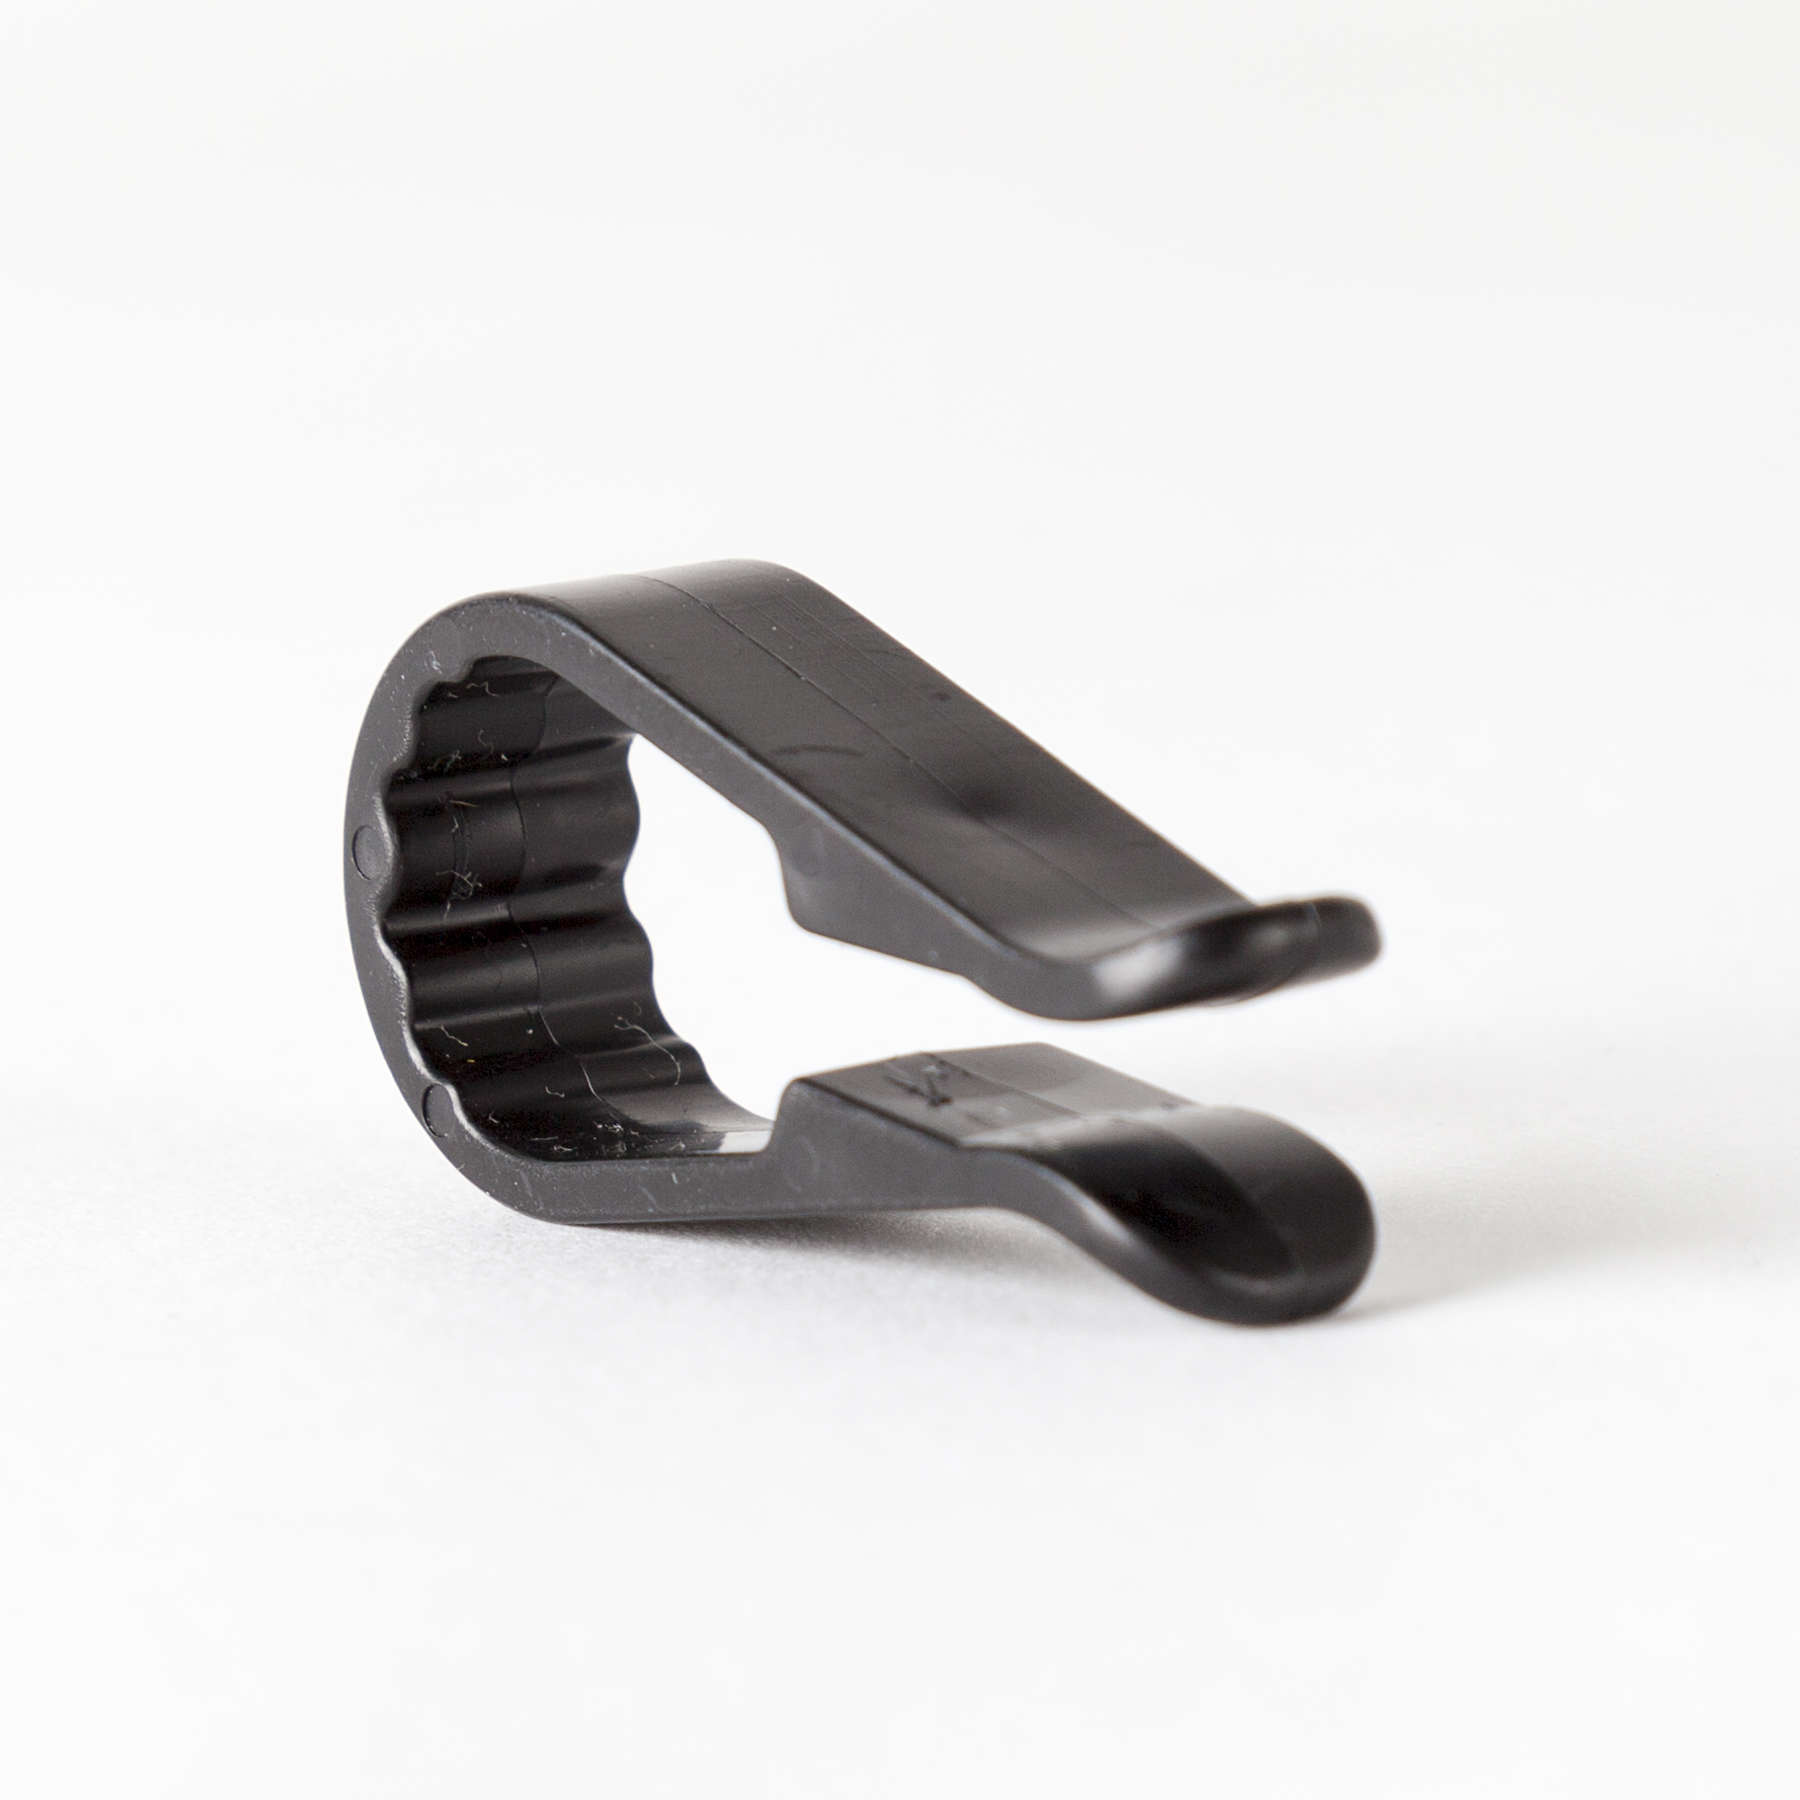 Black Plastic Clips For Securing Trousers | Retail Supplies ...